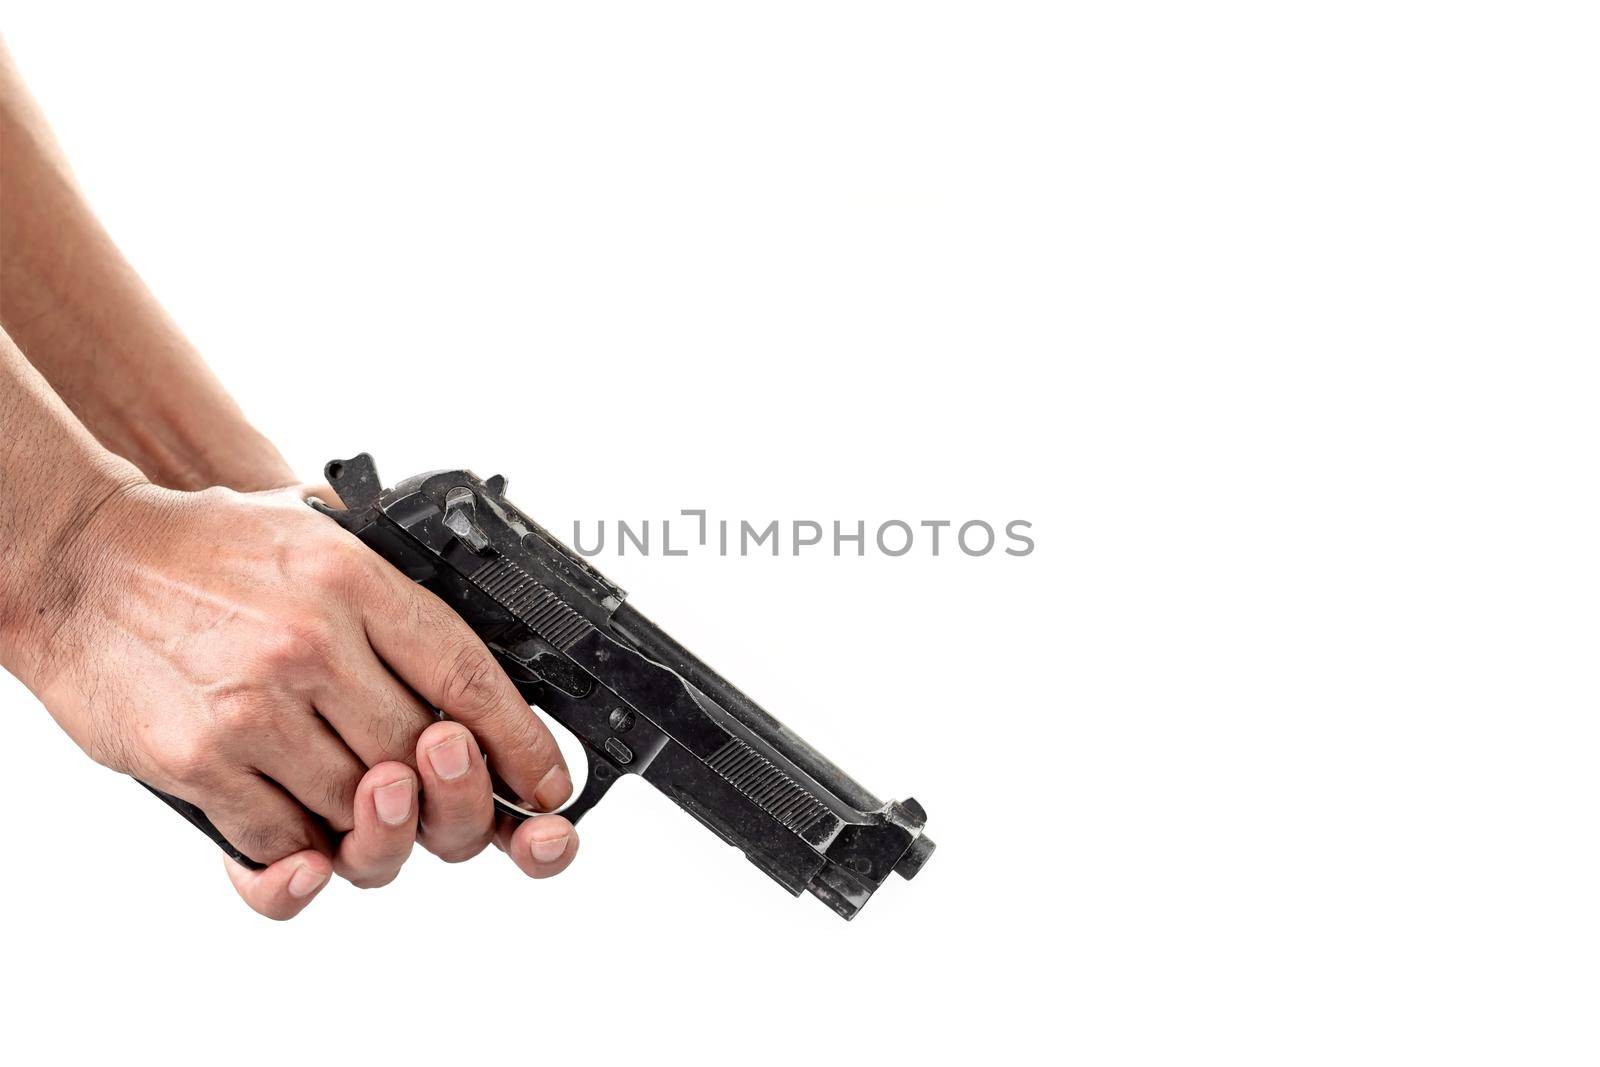 Close-up of a man's hand inspecting and checking a gun with a loaded magazine over white background.